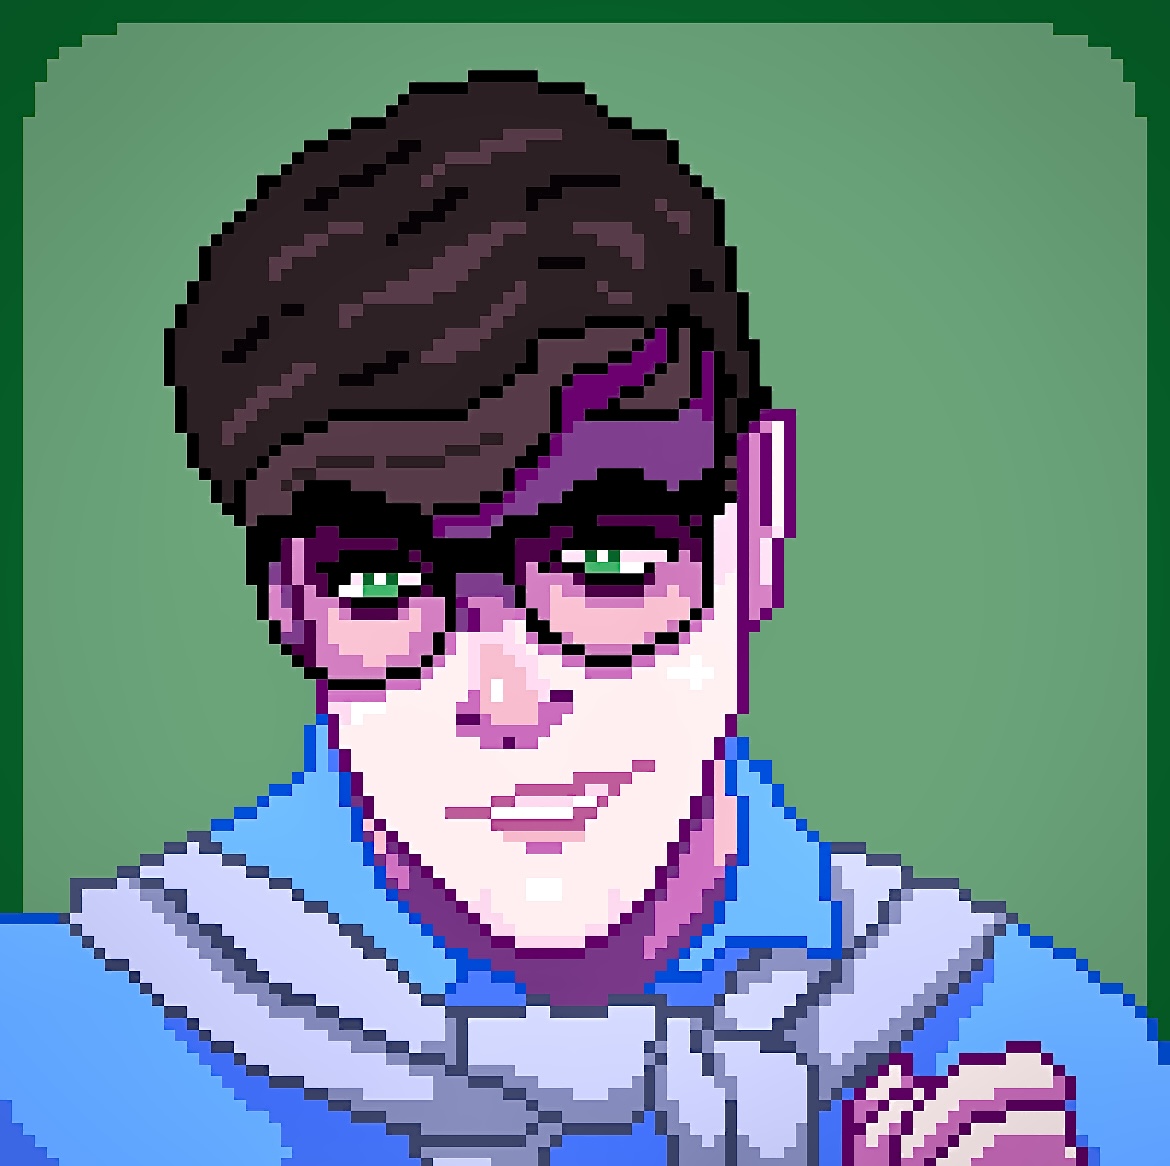 wow, i’m so proud of you thomas. you’re so mature🐍 #thomassanders #thomassandersart #sanderssides #sanderssidesart #pattonsanders #pattonsandersart #janussanders #janussandersart #digitalart #pixelart @ThomasSanders